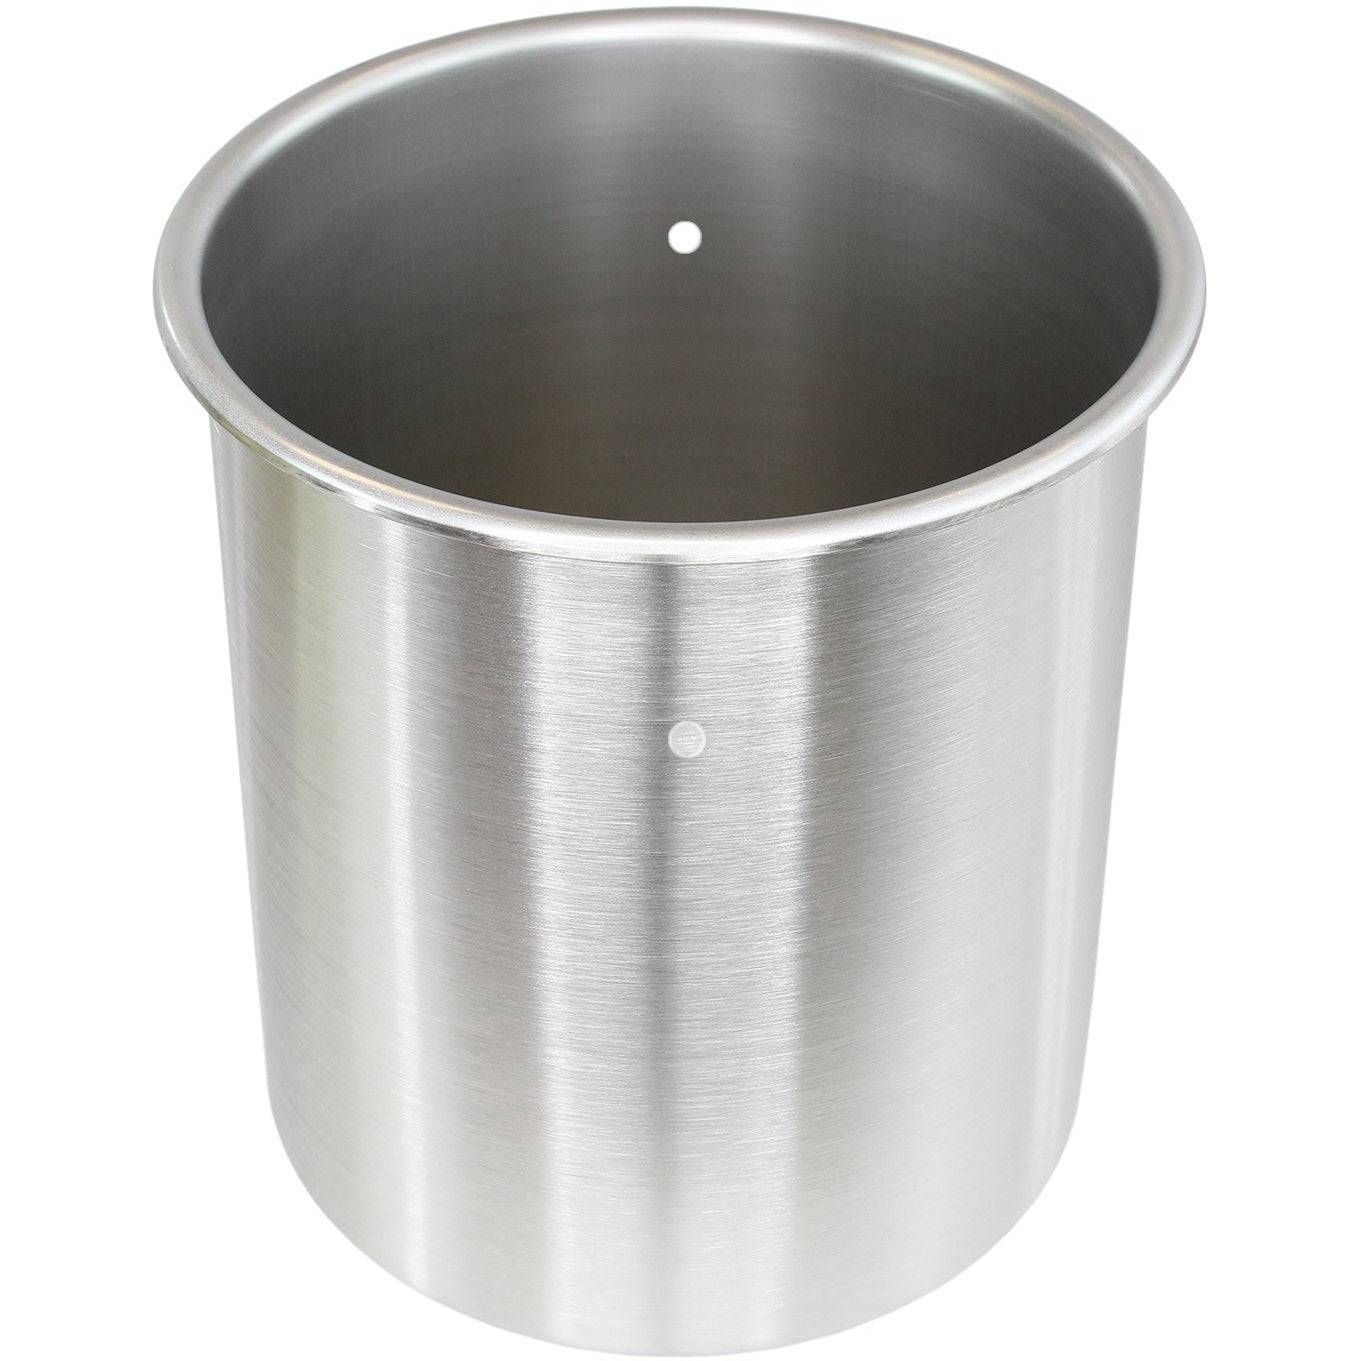 1.5 Gallon Tall Stainless Steel COLD TRAP - POT ONLY Shop All Categories BVV POT ONLY